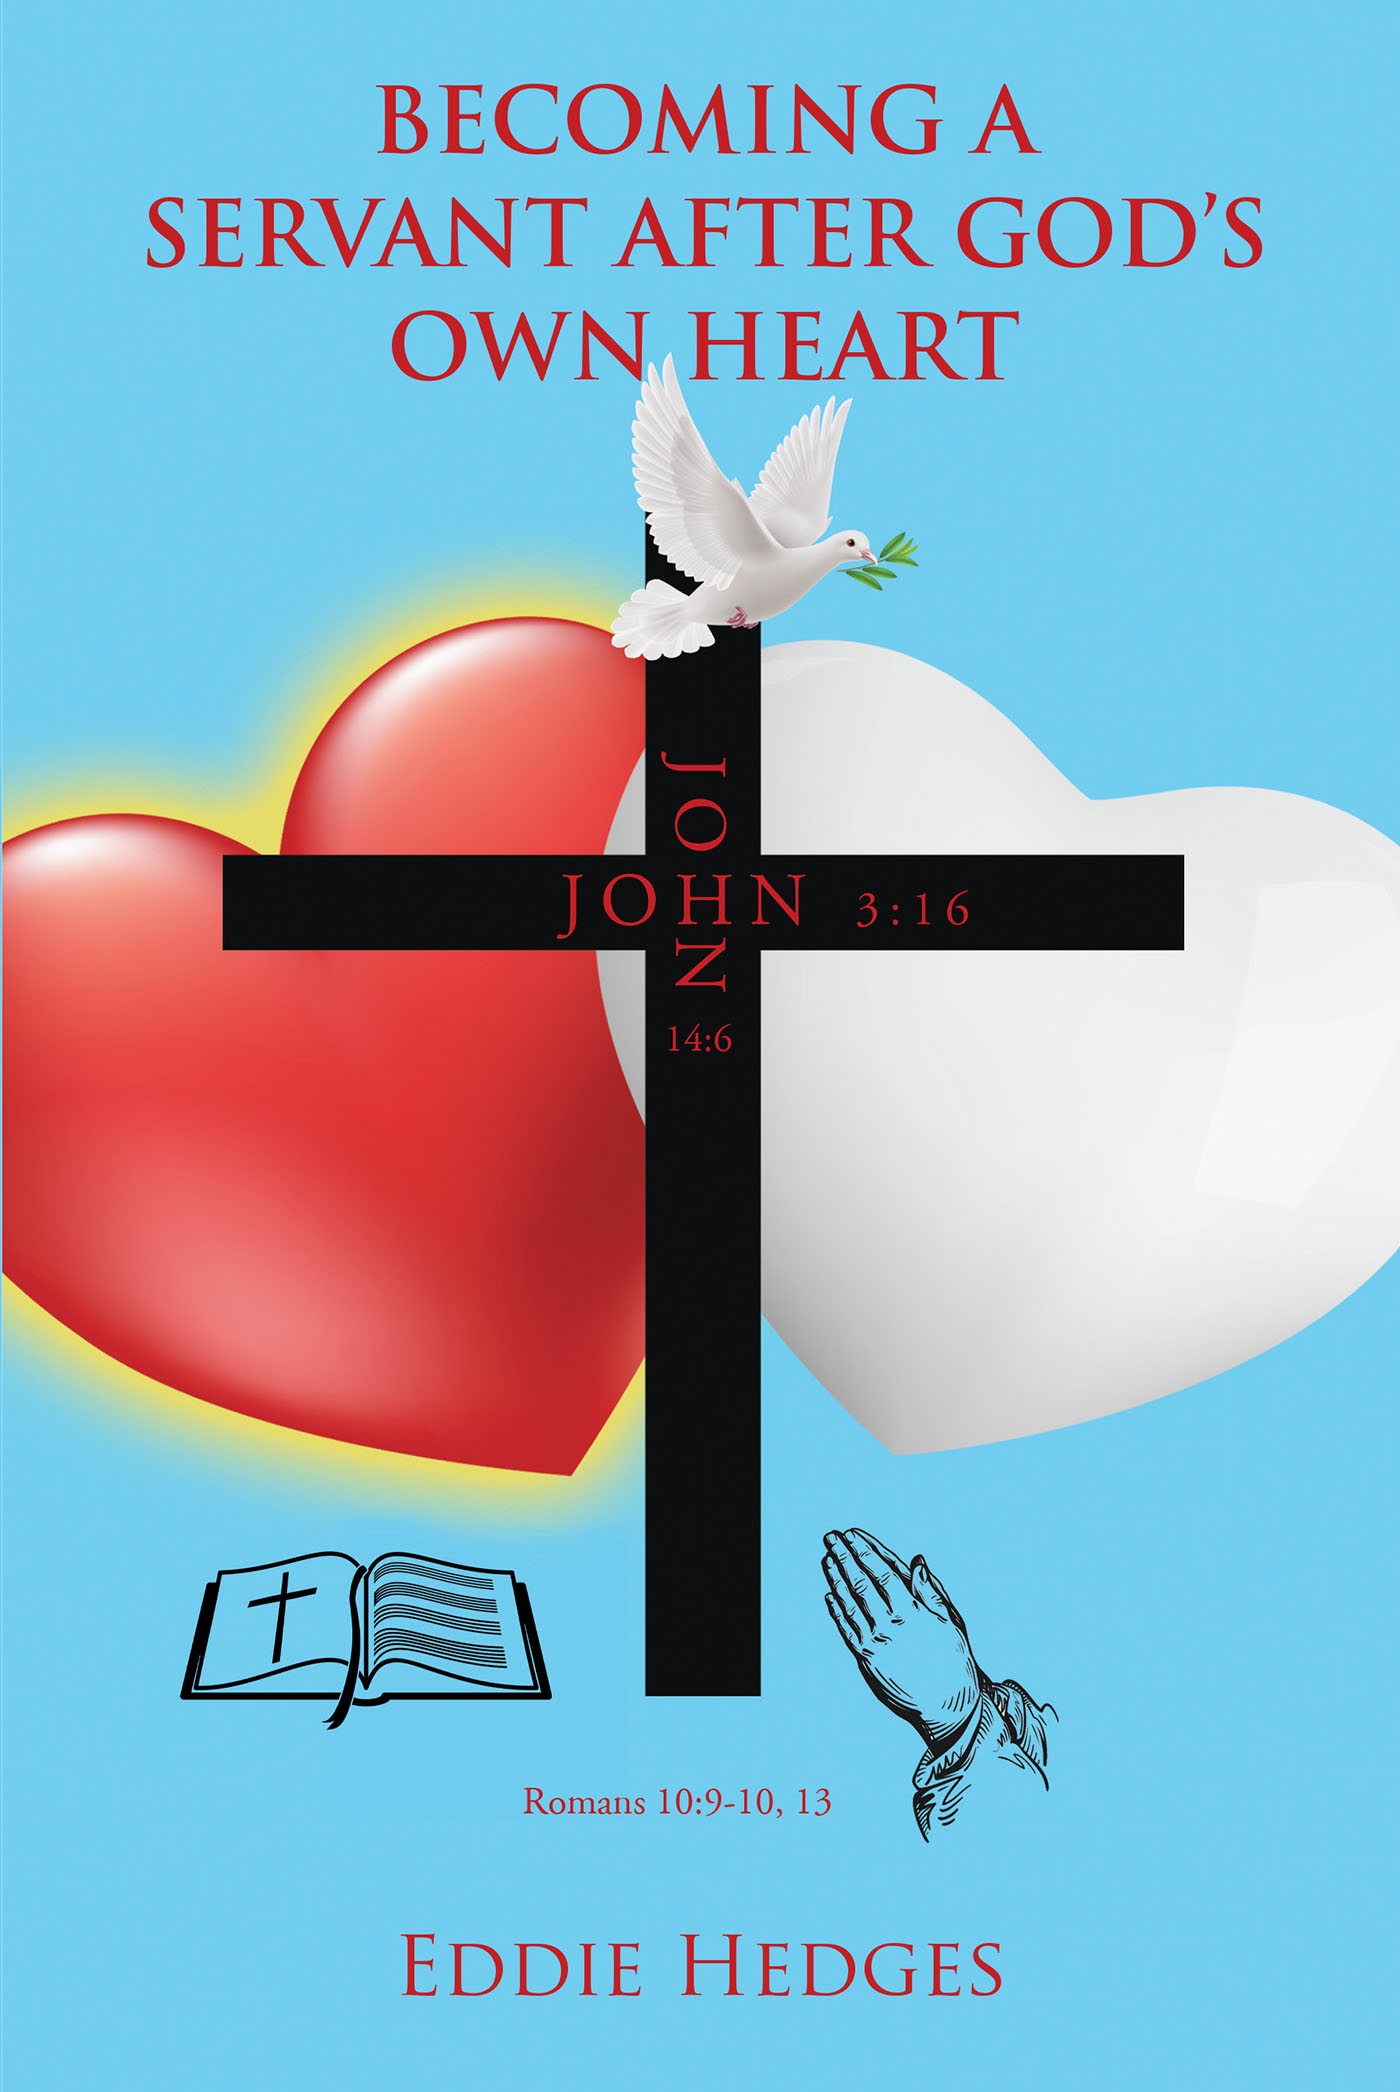 Eddie Hedges’ Newly Released "Becoming a Servant After God’s Own Heart" Presents a Unique Opportunity to Grow in Your Spiritual Walk with God